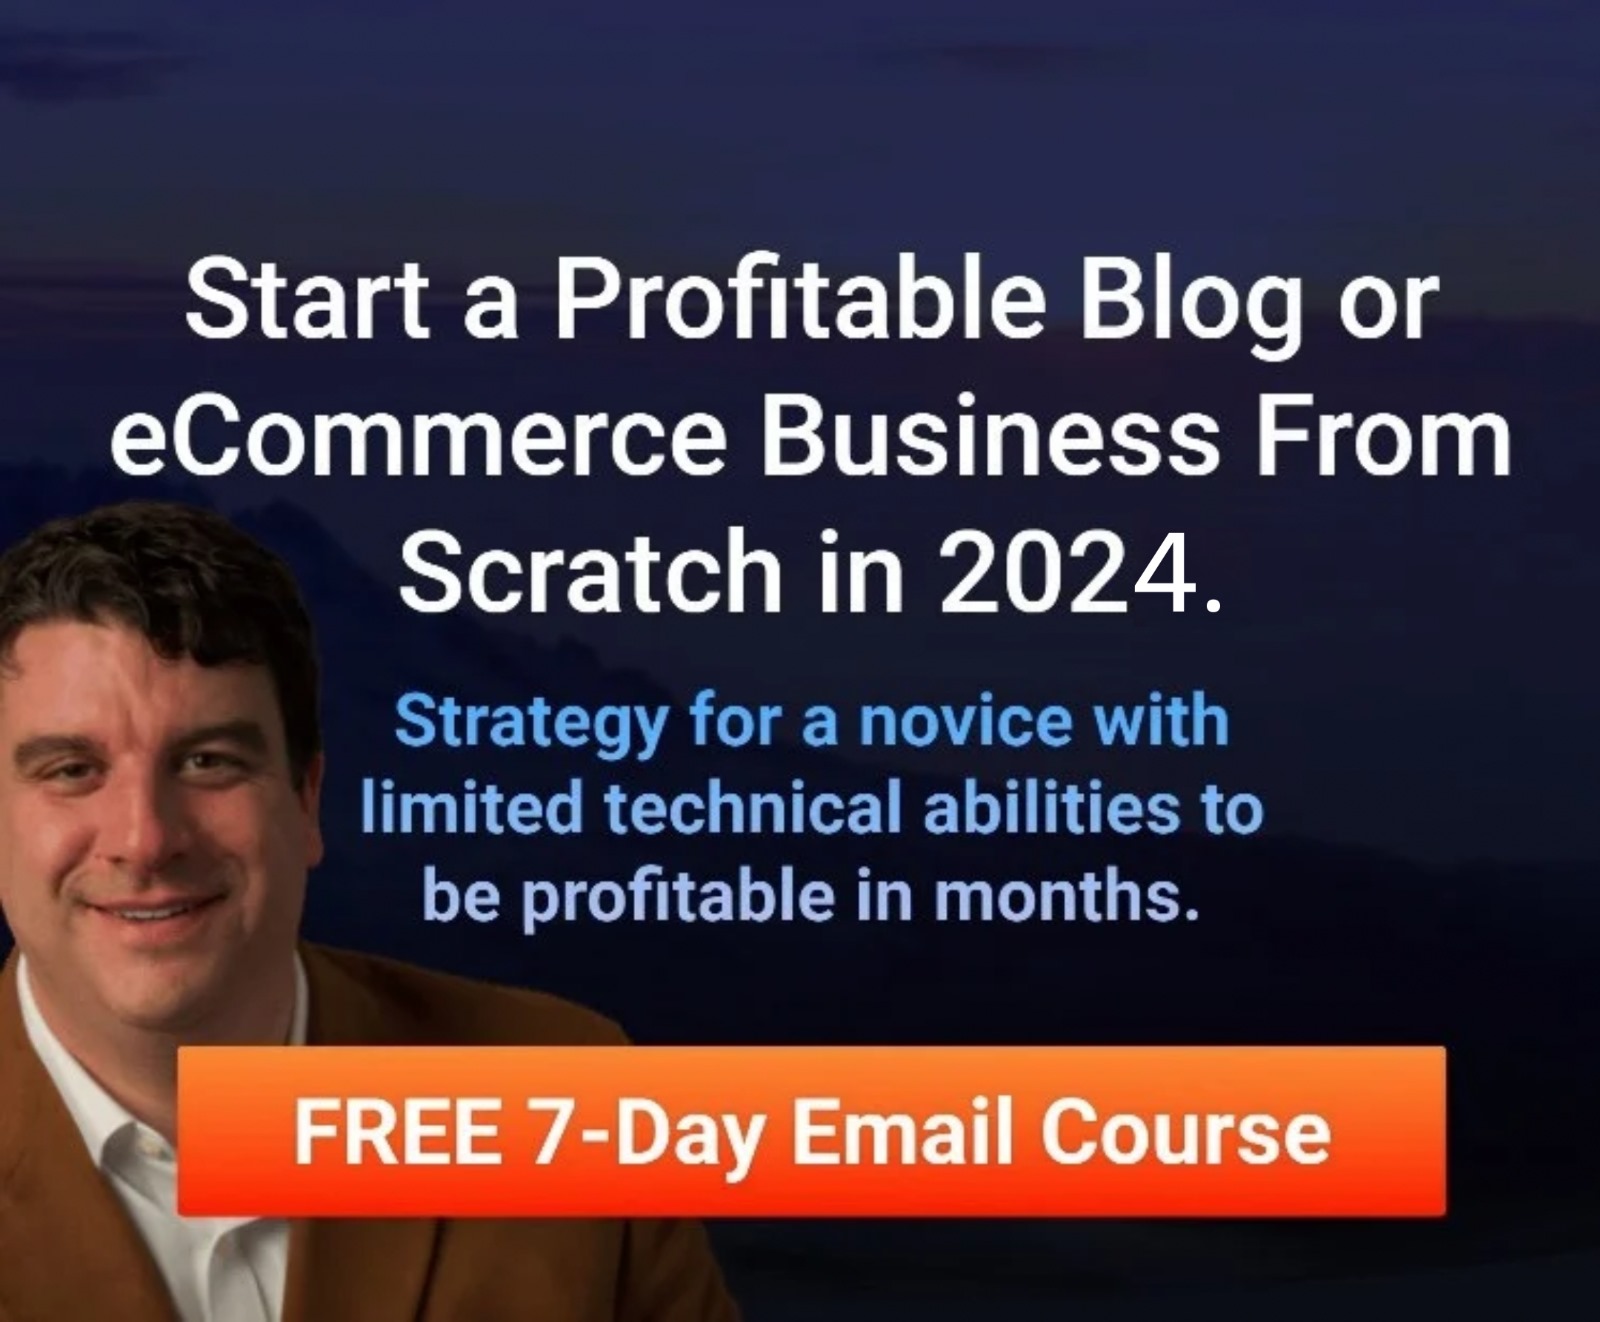 Start a Profitable Blog or eCommerce Business From Scratch in 2024. FREE 7-Day Email Course